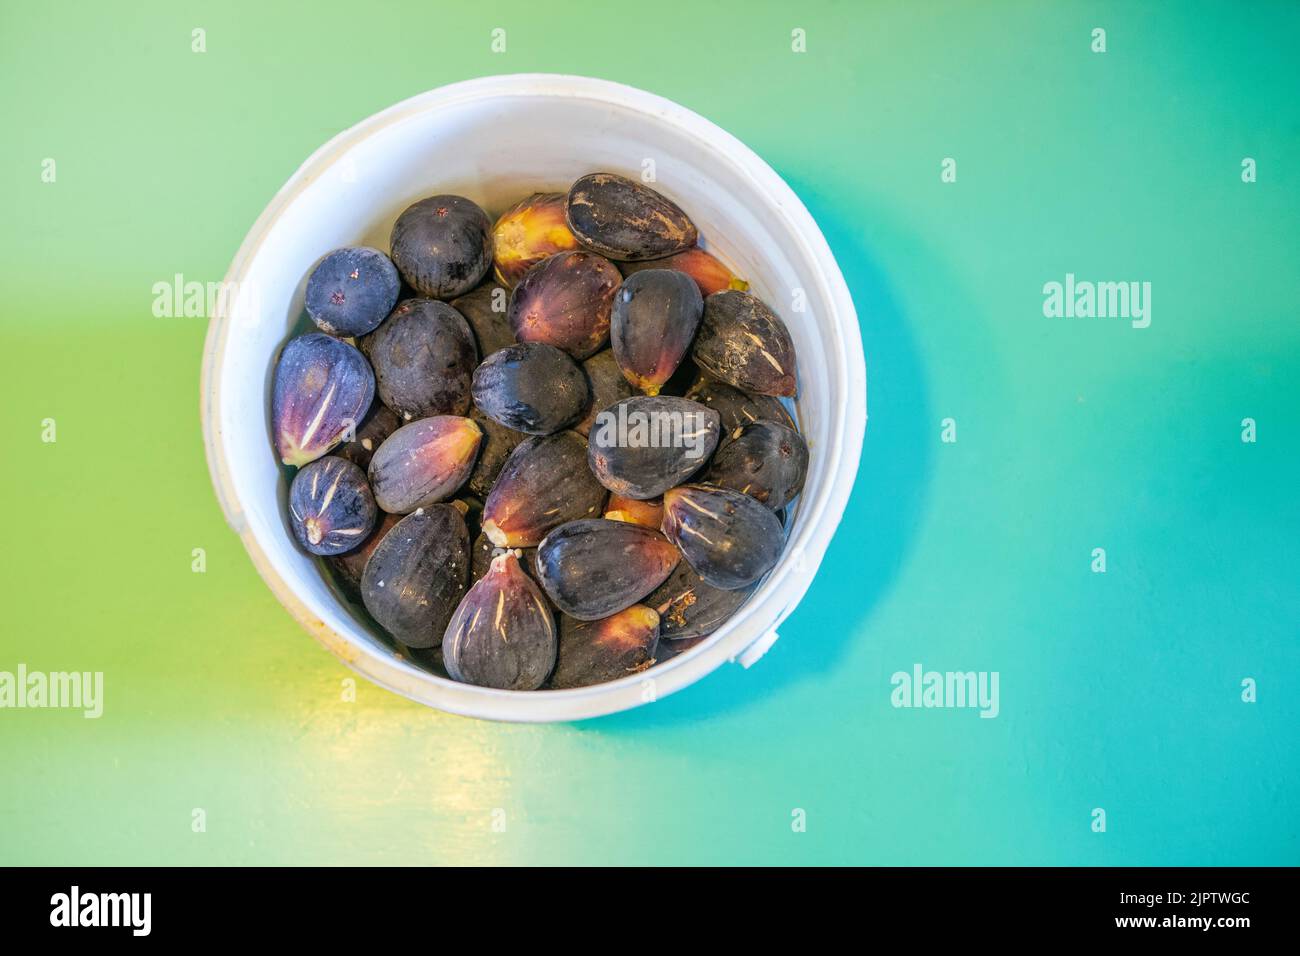 Bucket full of fresh fig just harvested. Studio shot with natural light. Turquoise background Stock Photo